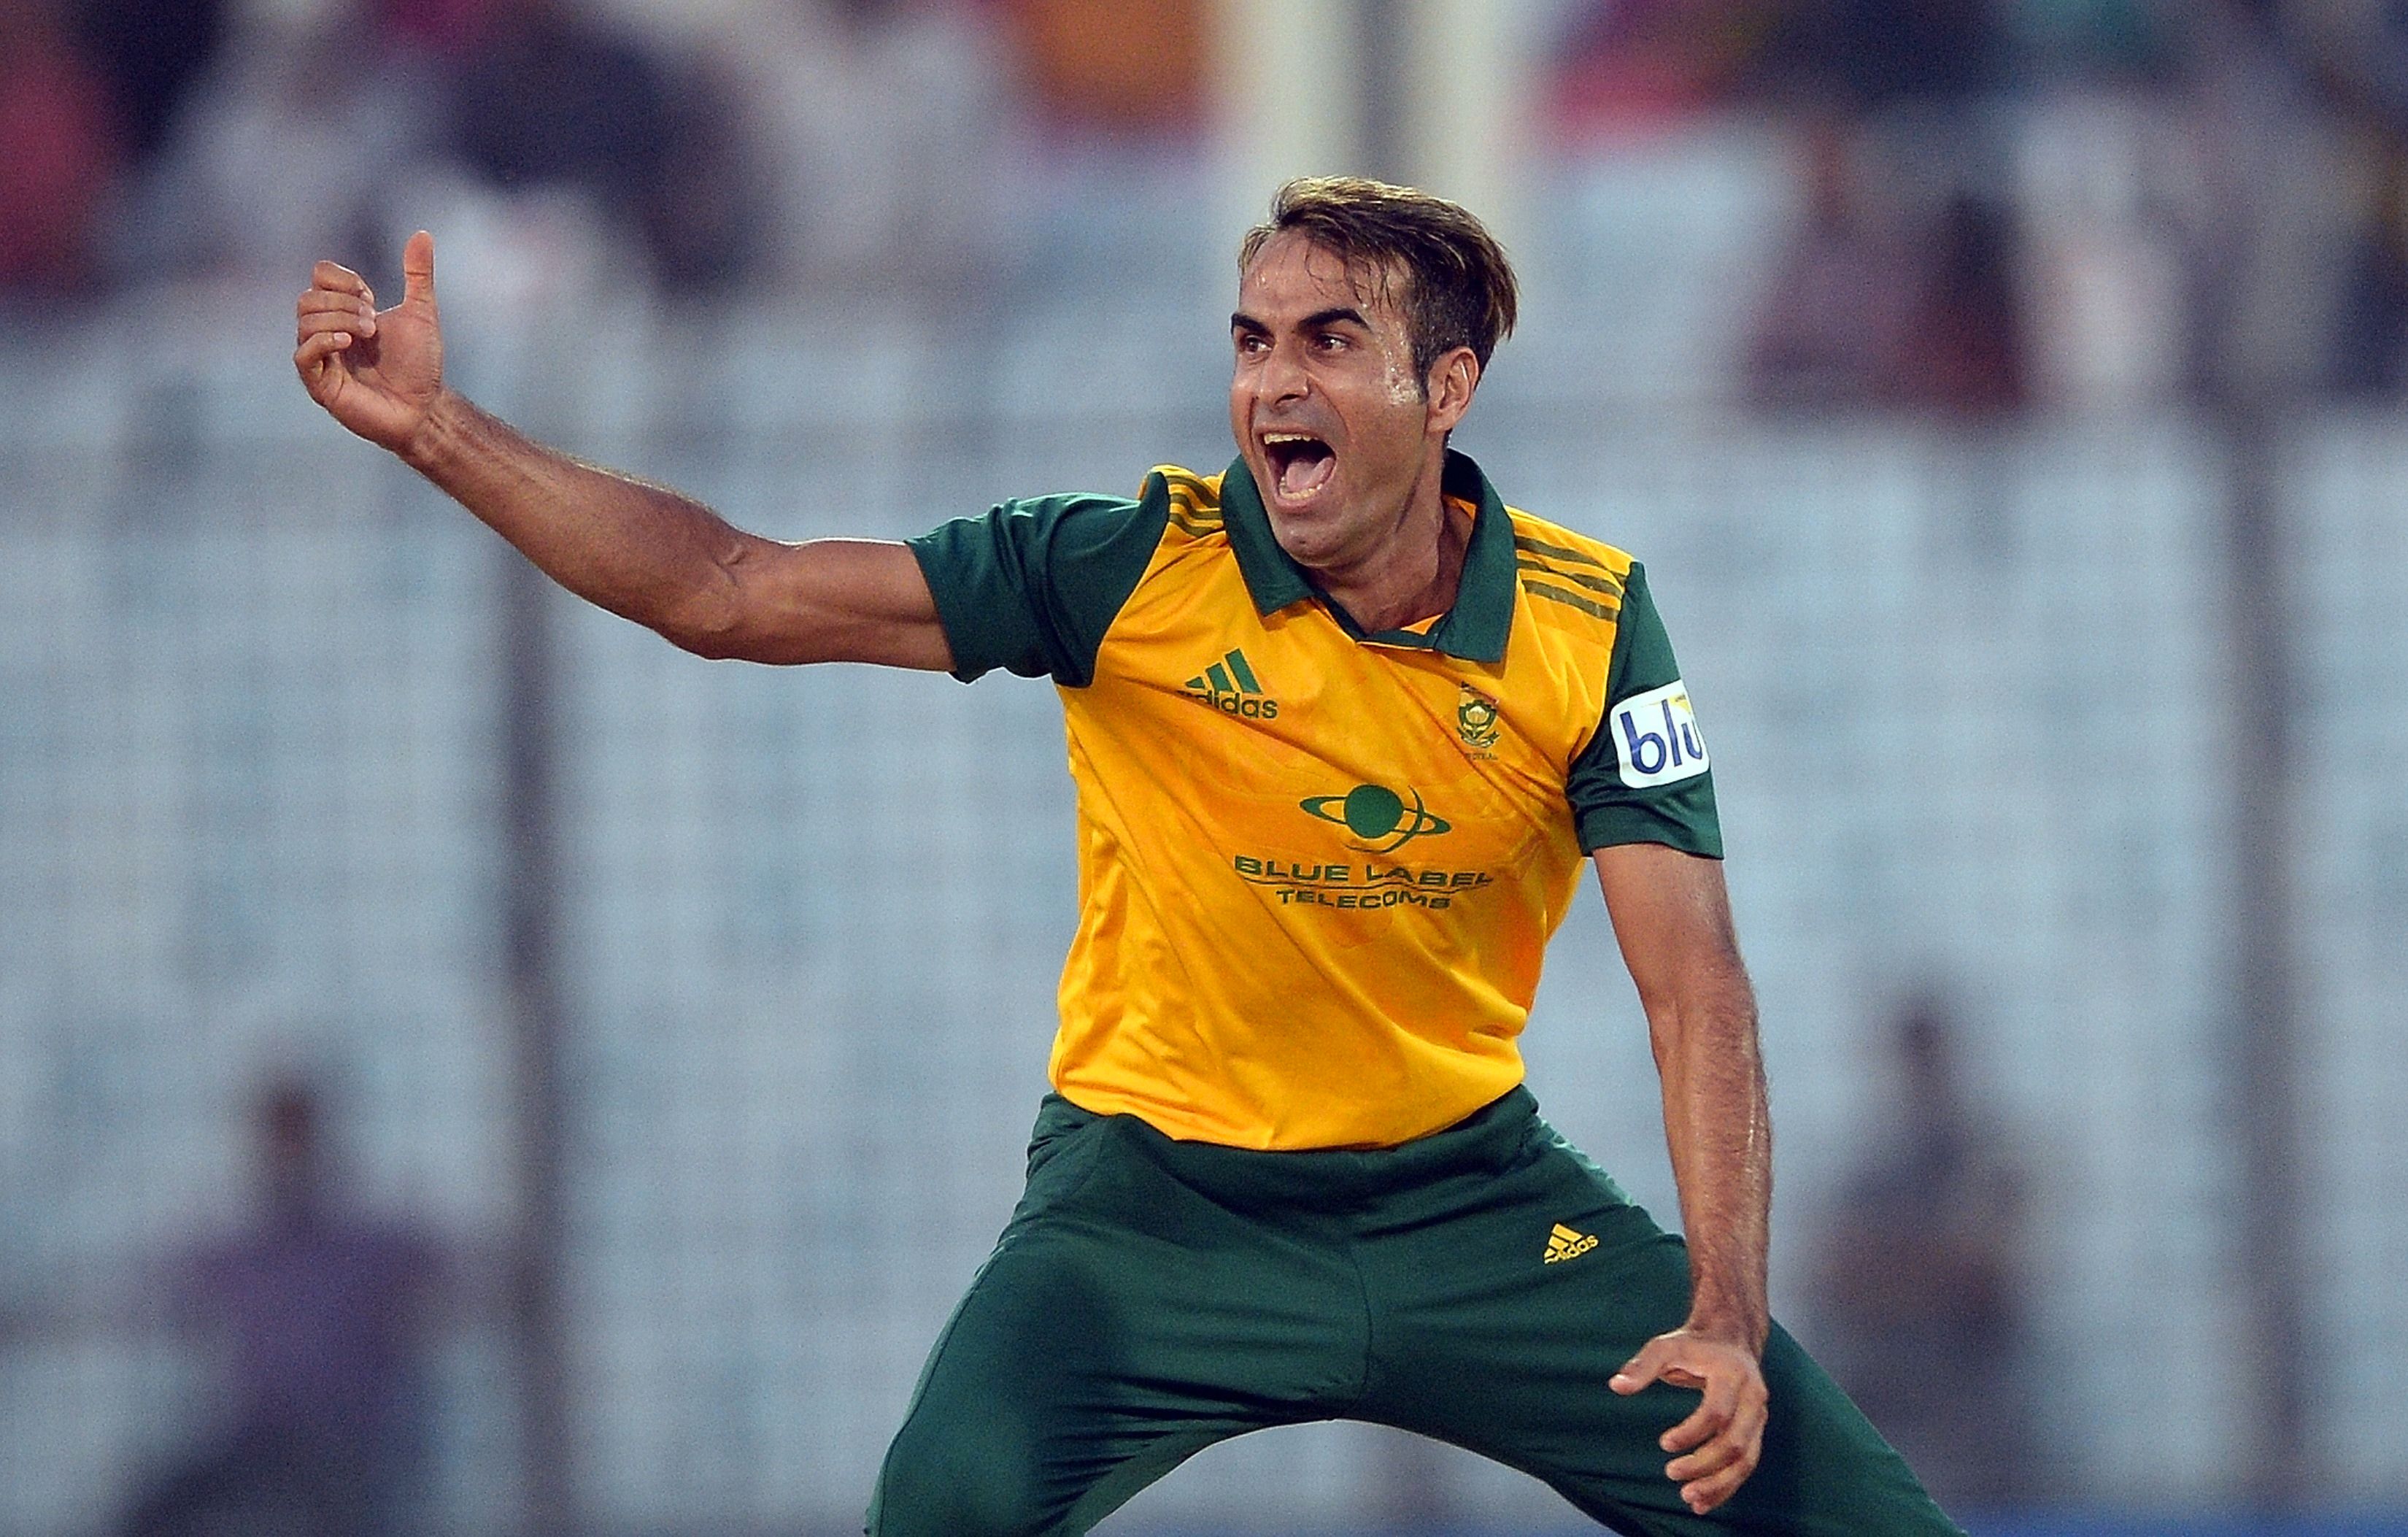 South Africa leg spinner Imran Tahir celebrates the wicket of Netherlands batsman Wesley Barresi. He leads the pack with with 11 wickets in four games. Photo: AFP